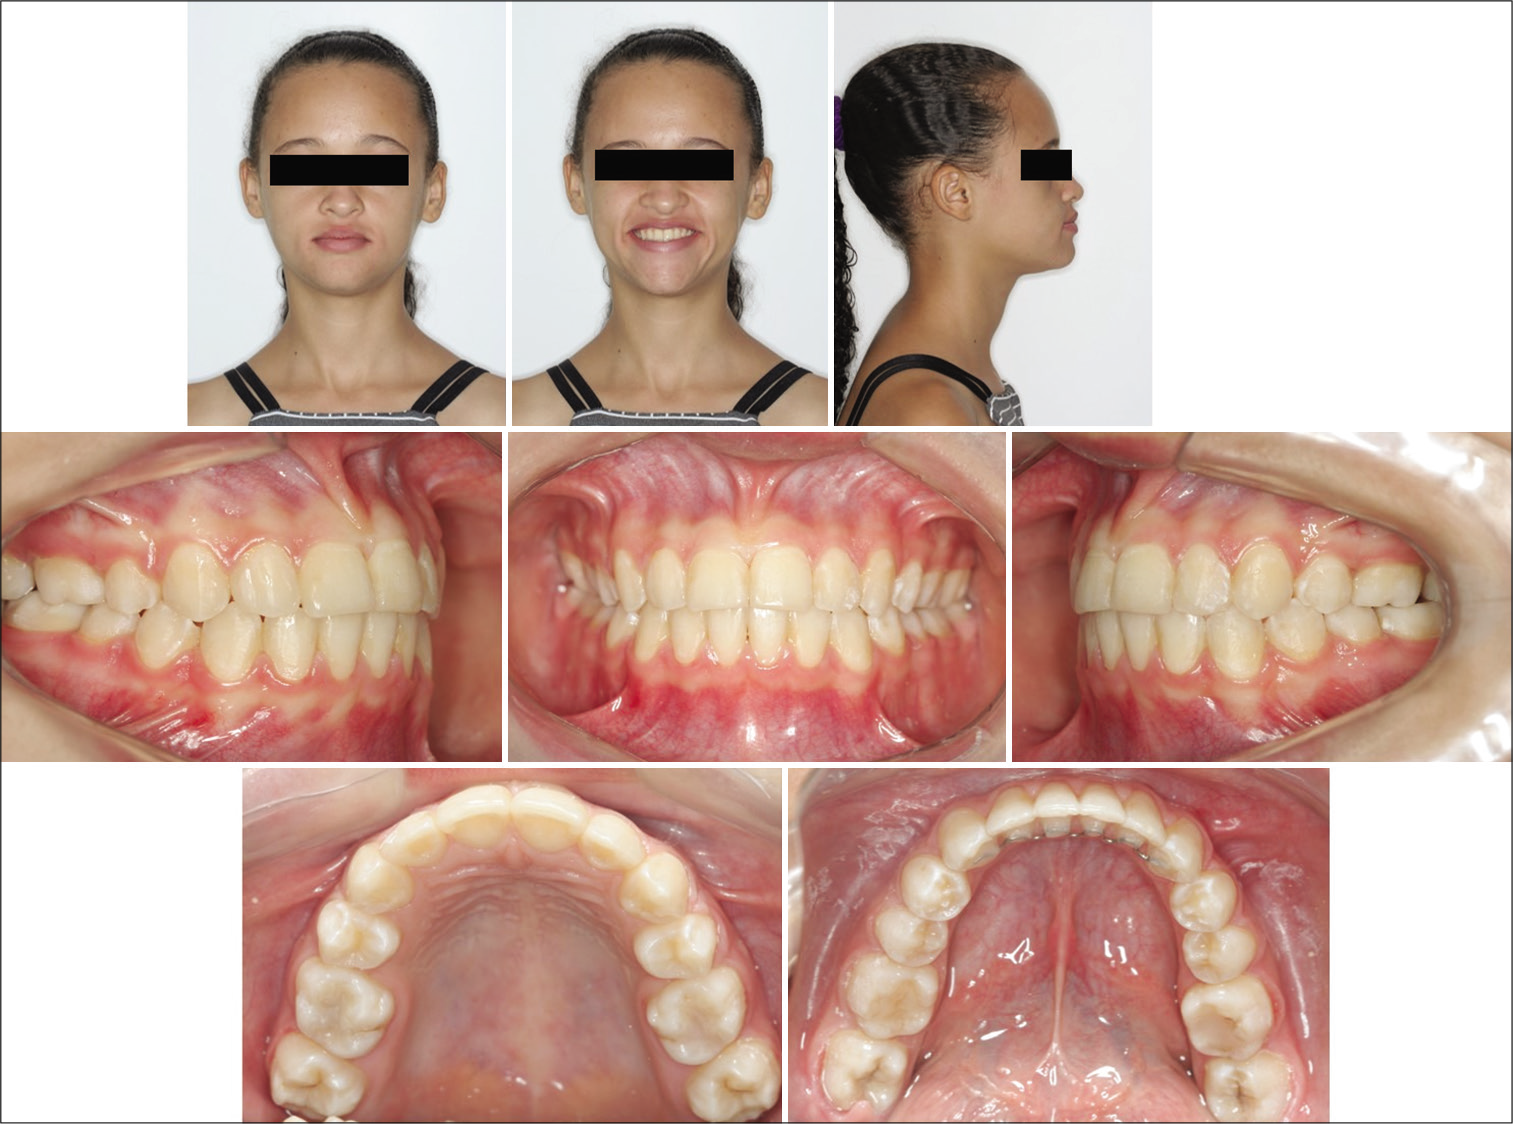 Final clinical aspect 2 years after orthodontic treatment.